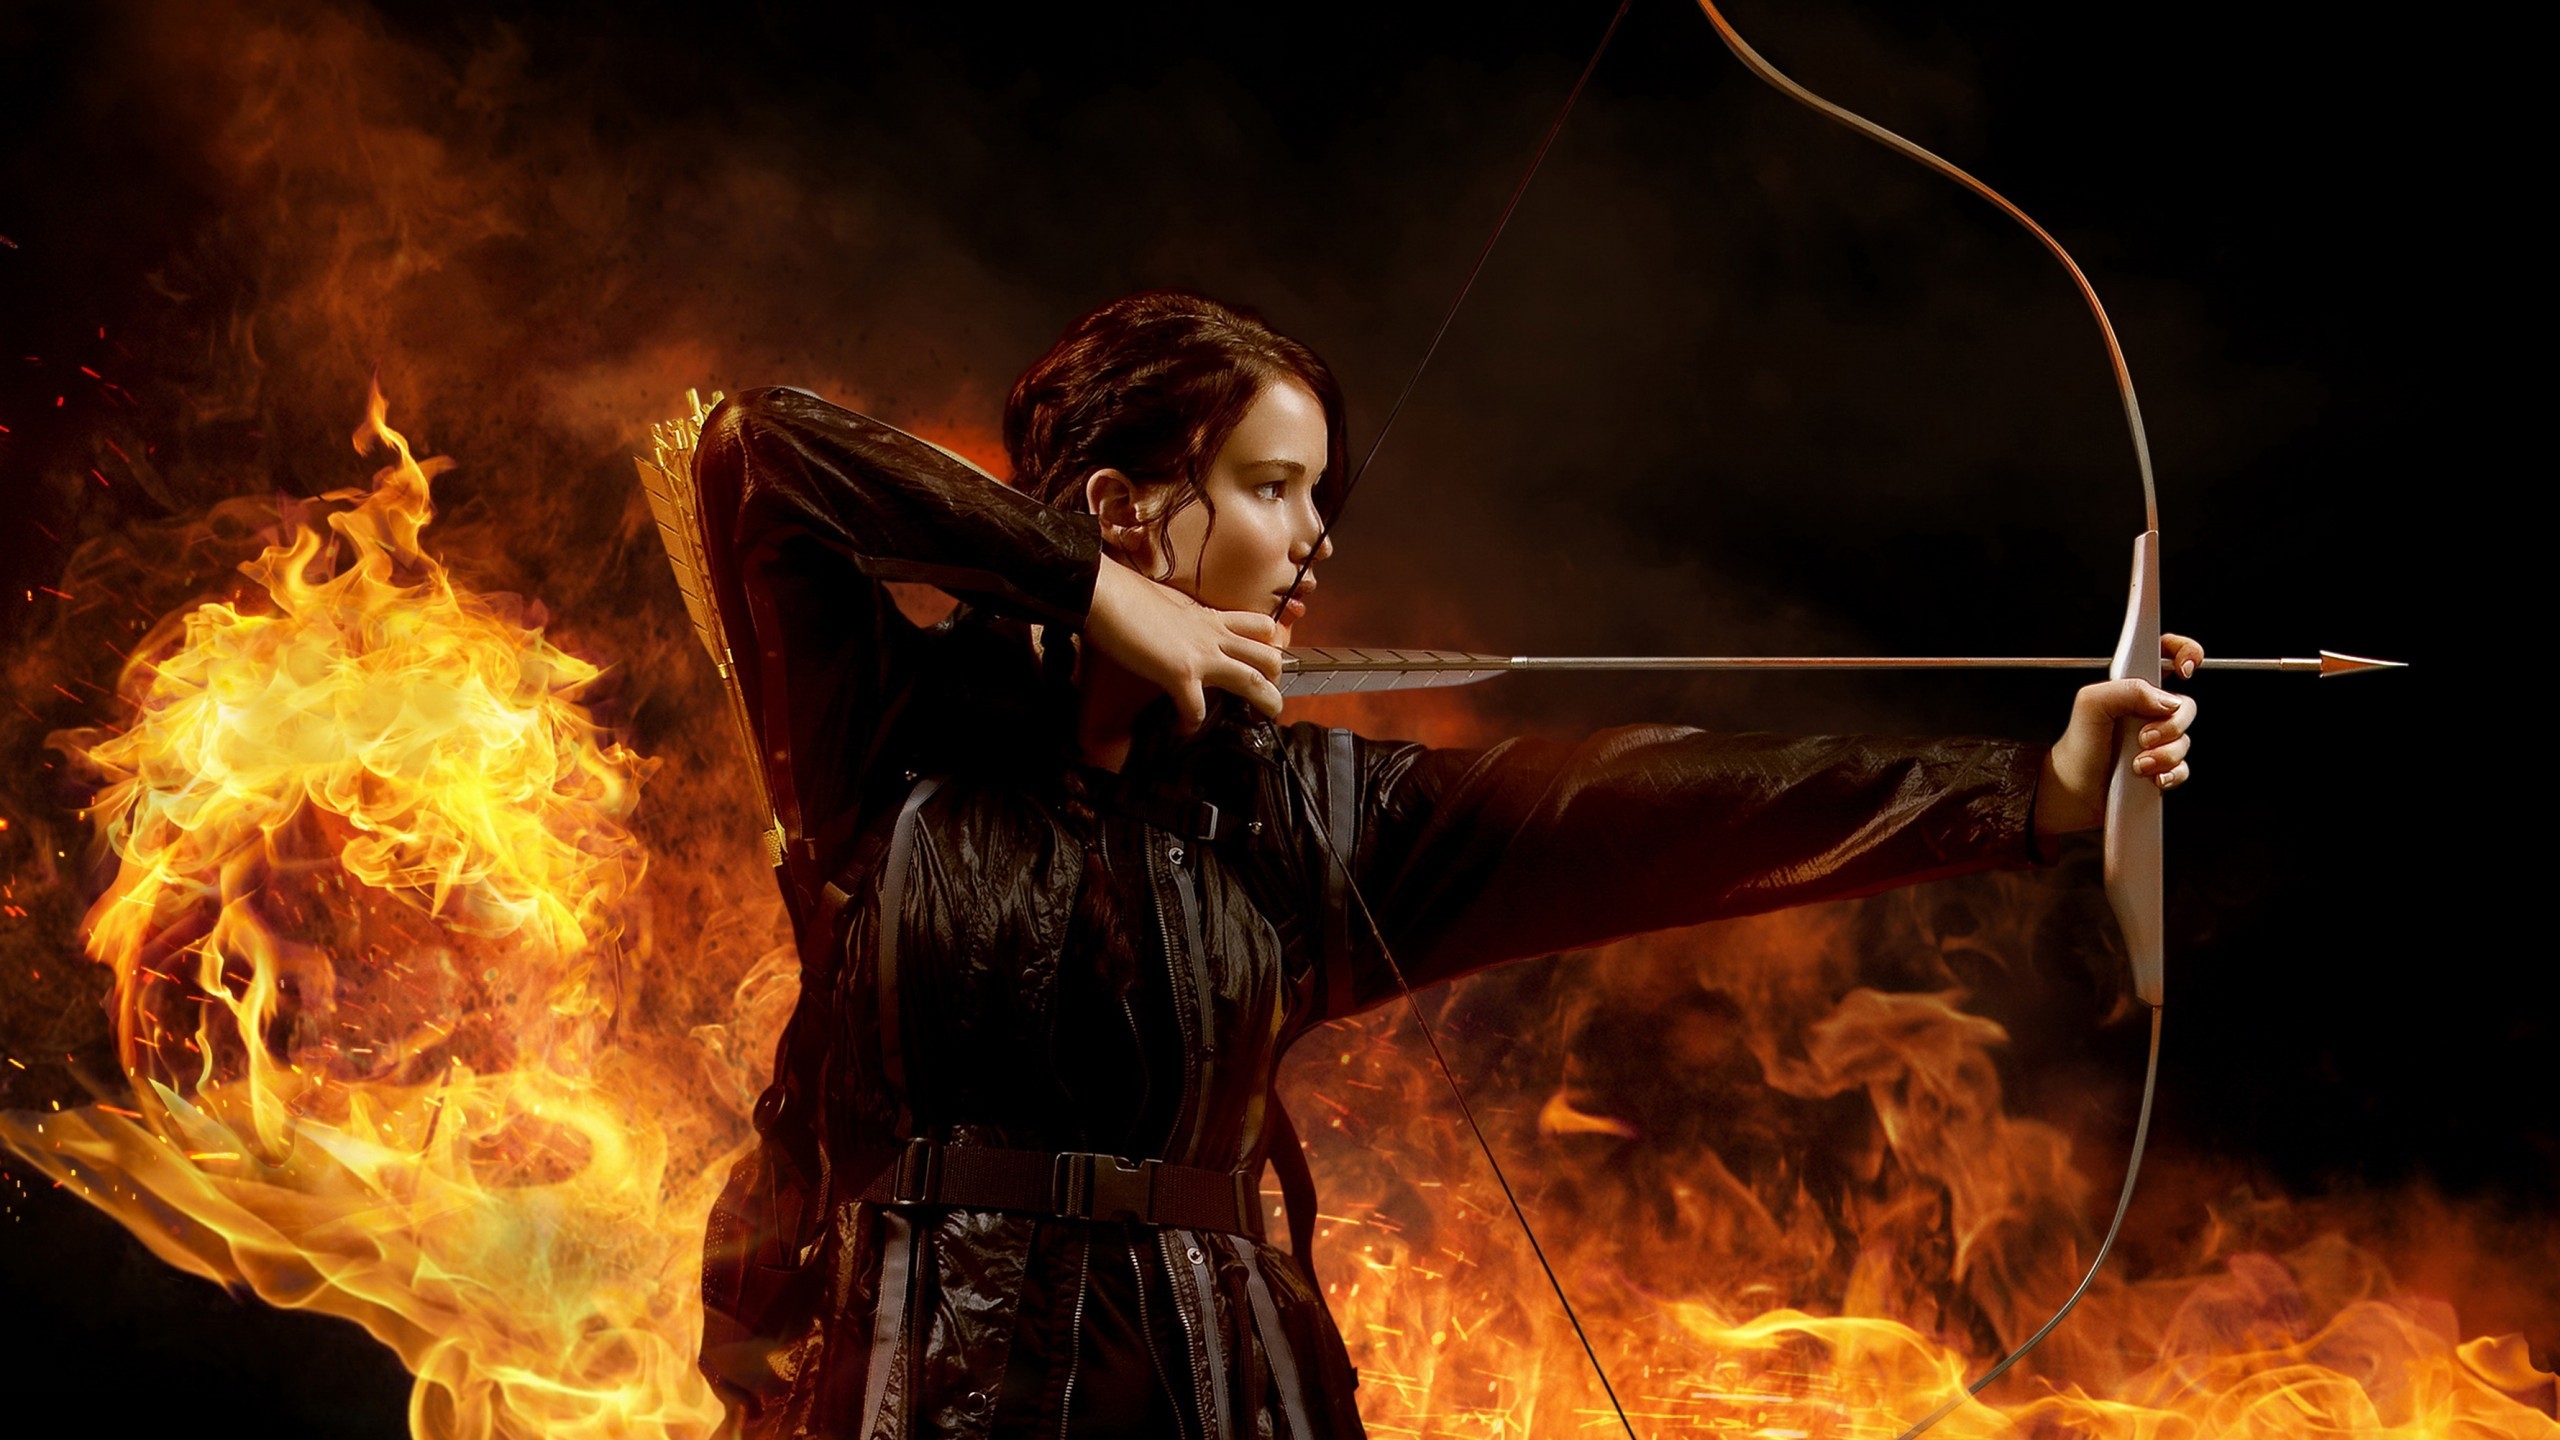 The Hunger Games 2013 for 2560x1440 HDTV resolution